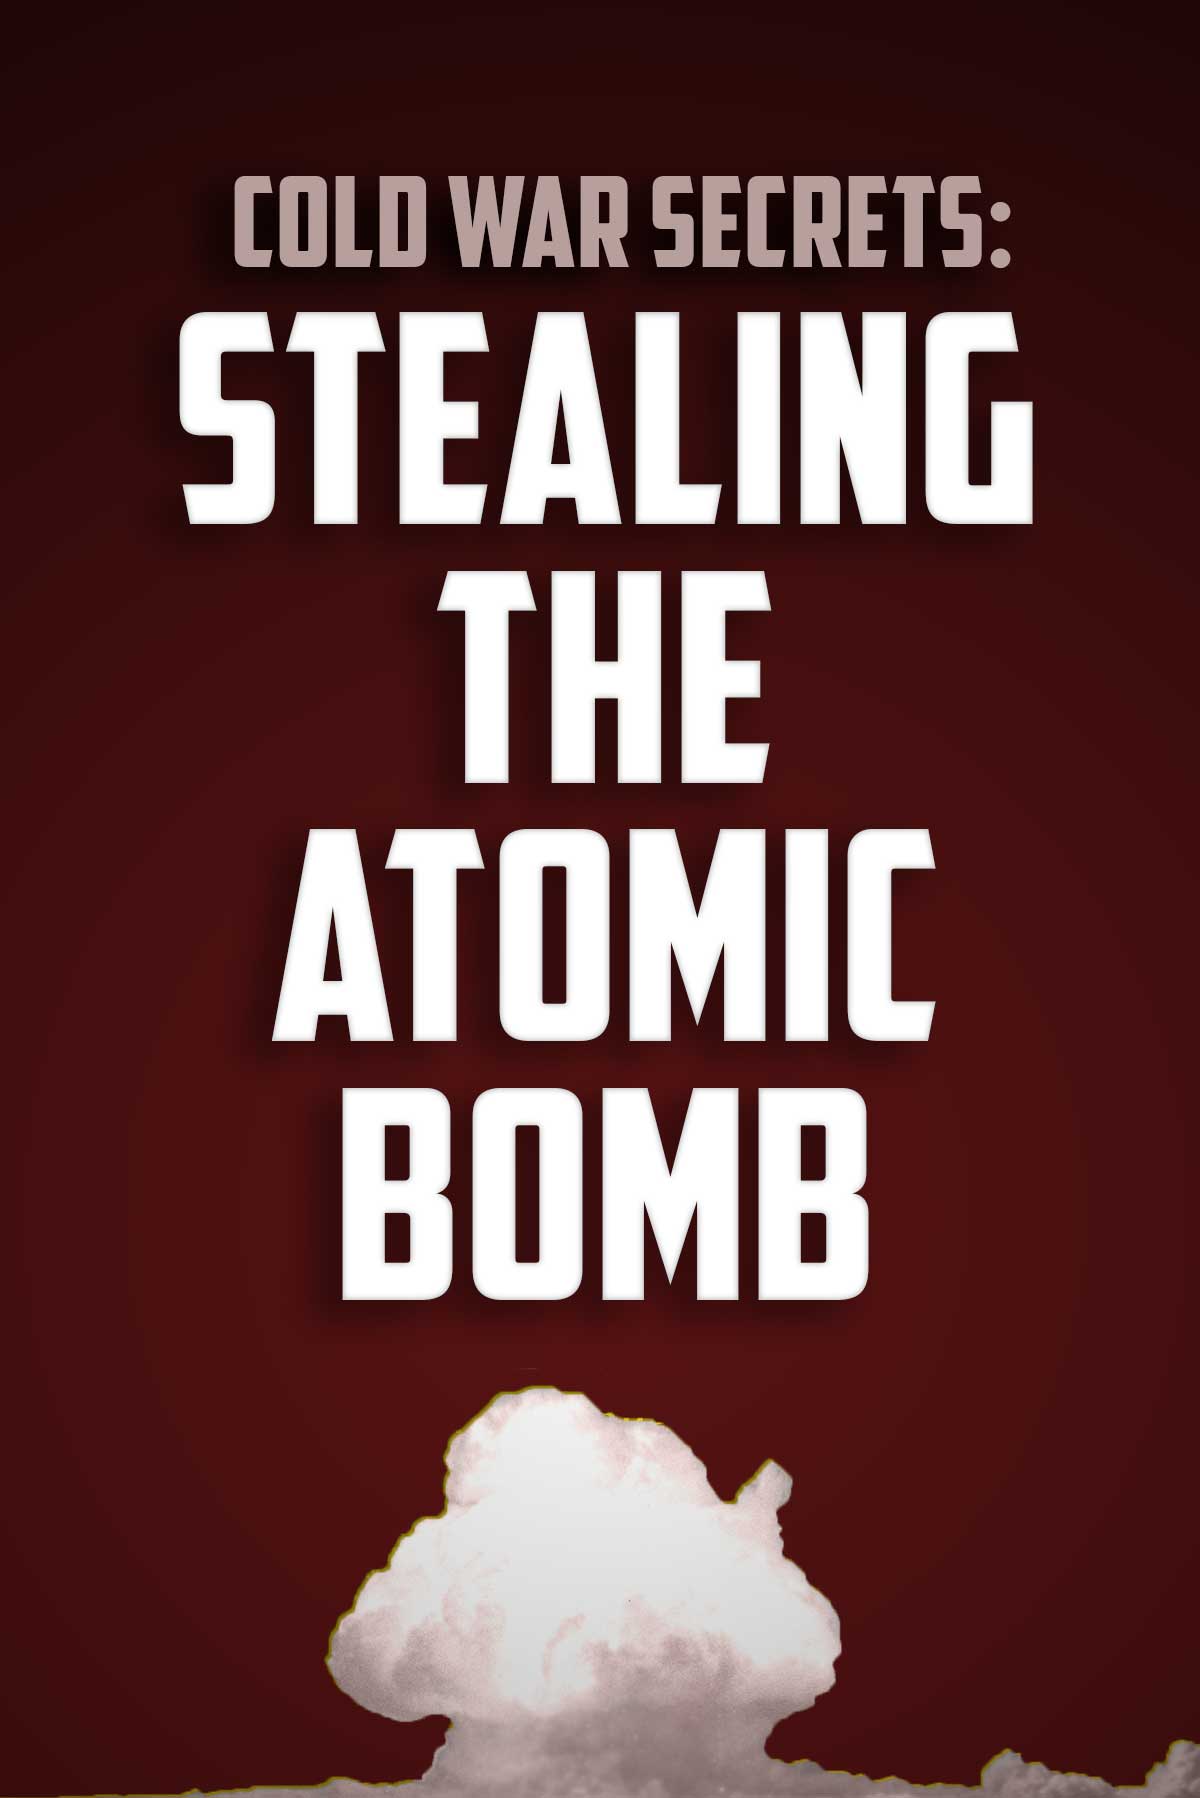 Cold War Secrets: Stealing The Atomic Bomb